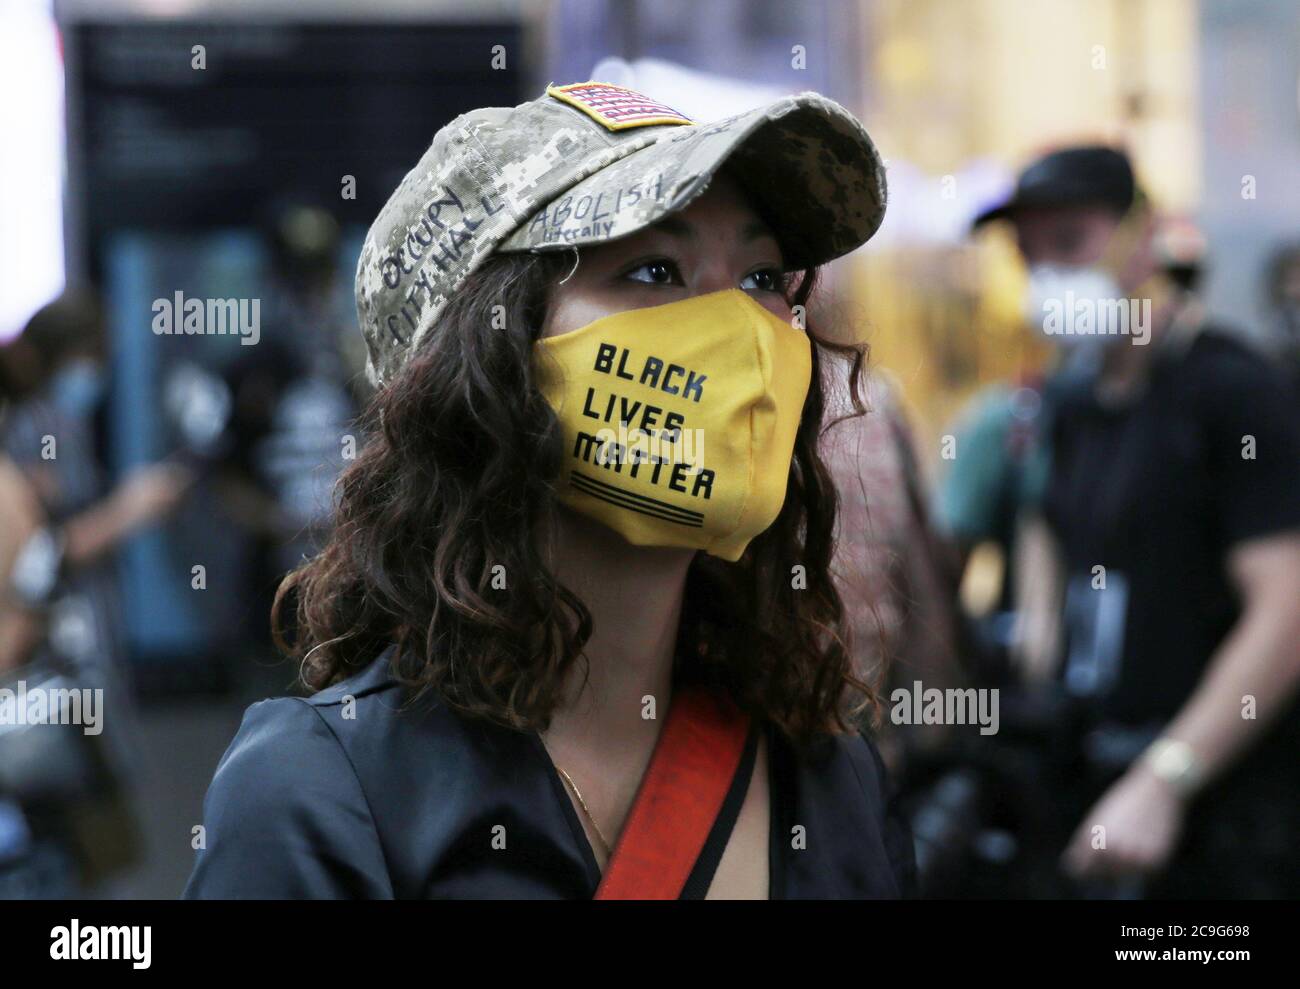 New York, United States. 31st July, 2020. People gather in Times Square for the 'Take Your Knee Off Our Necks March' in New York City on Friday, July 31, 2020. The 'Take Your Knee Off Our Necks March' is a protest of police brutality, black on black crime, institutionalized racism, discrimination, immigration, education equality, and youth resources. Photo by John Angelillo/UPI Credit: UPI/Alamy Live News Stock Photo